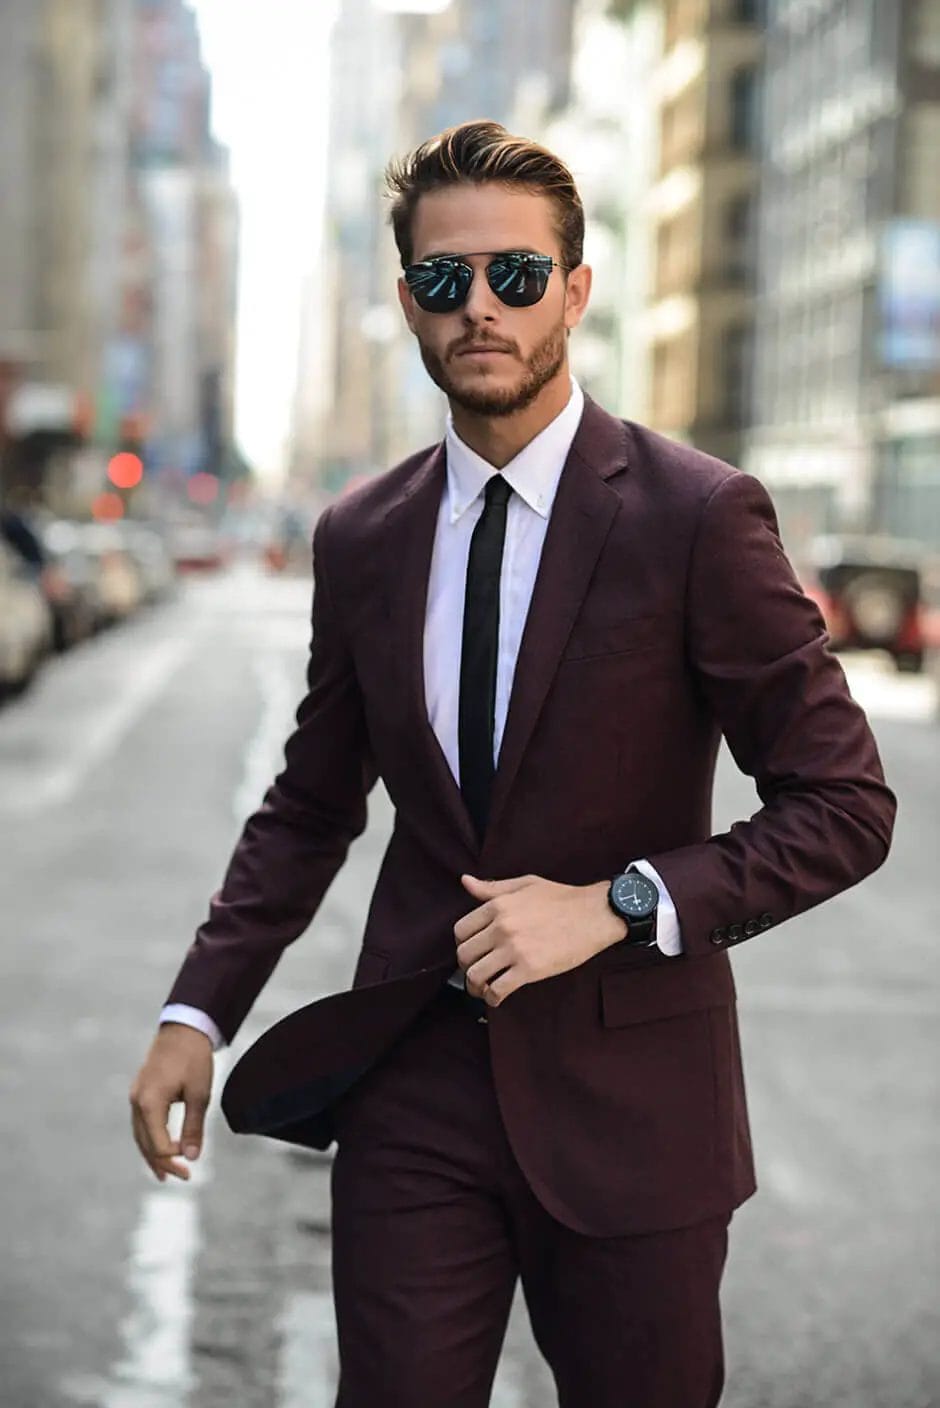 We have found some interesting examples of outfits for different seasons with the connection of all having great mens ties to show you how to wear them perfectly to complement your chosen attire.